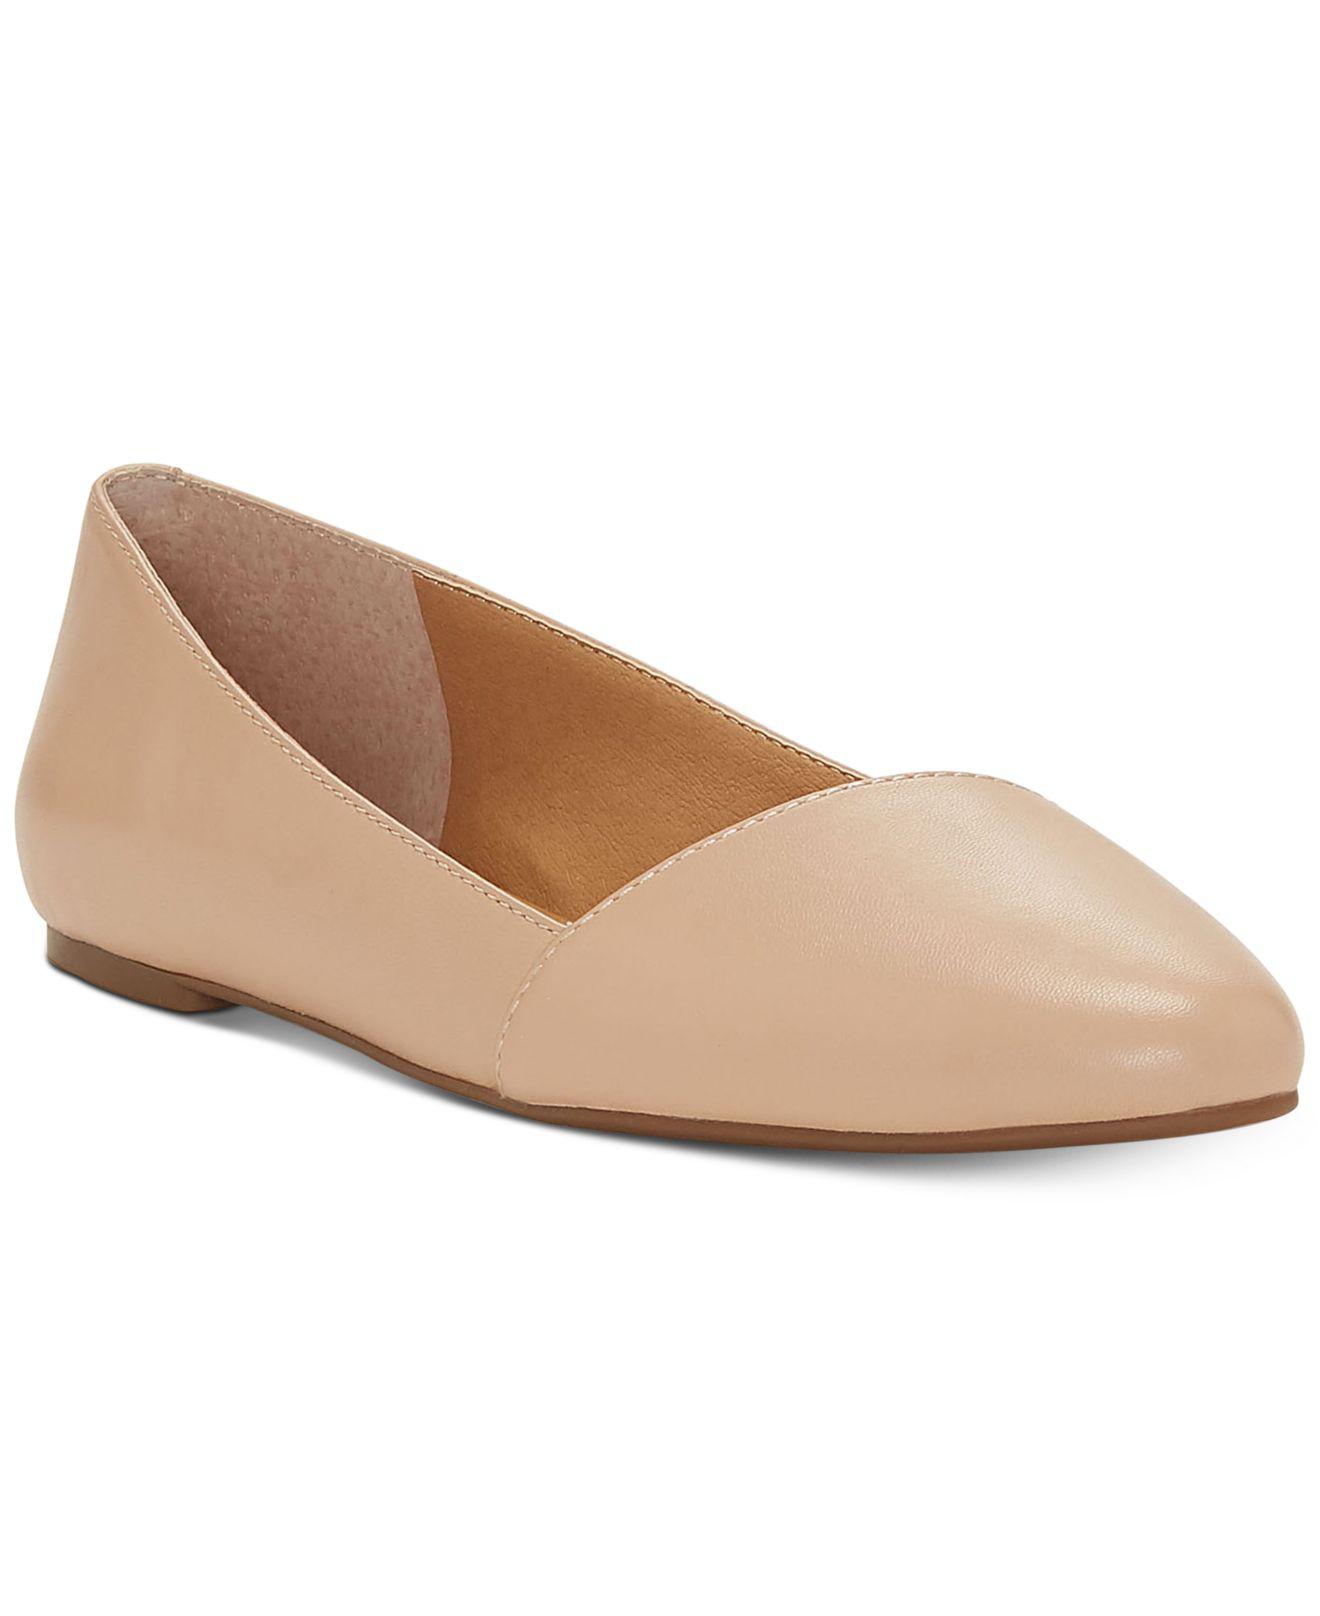 Buy > lucky brand archh flats > in stock